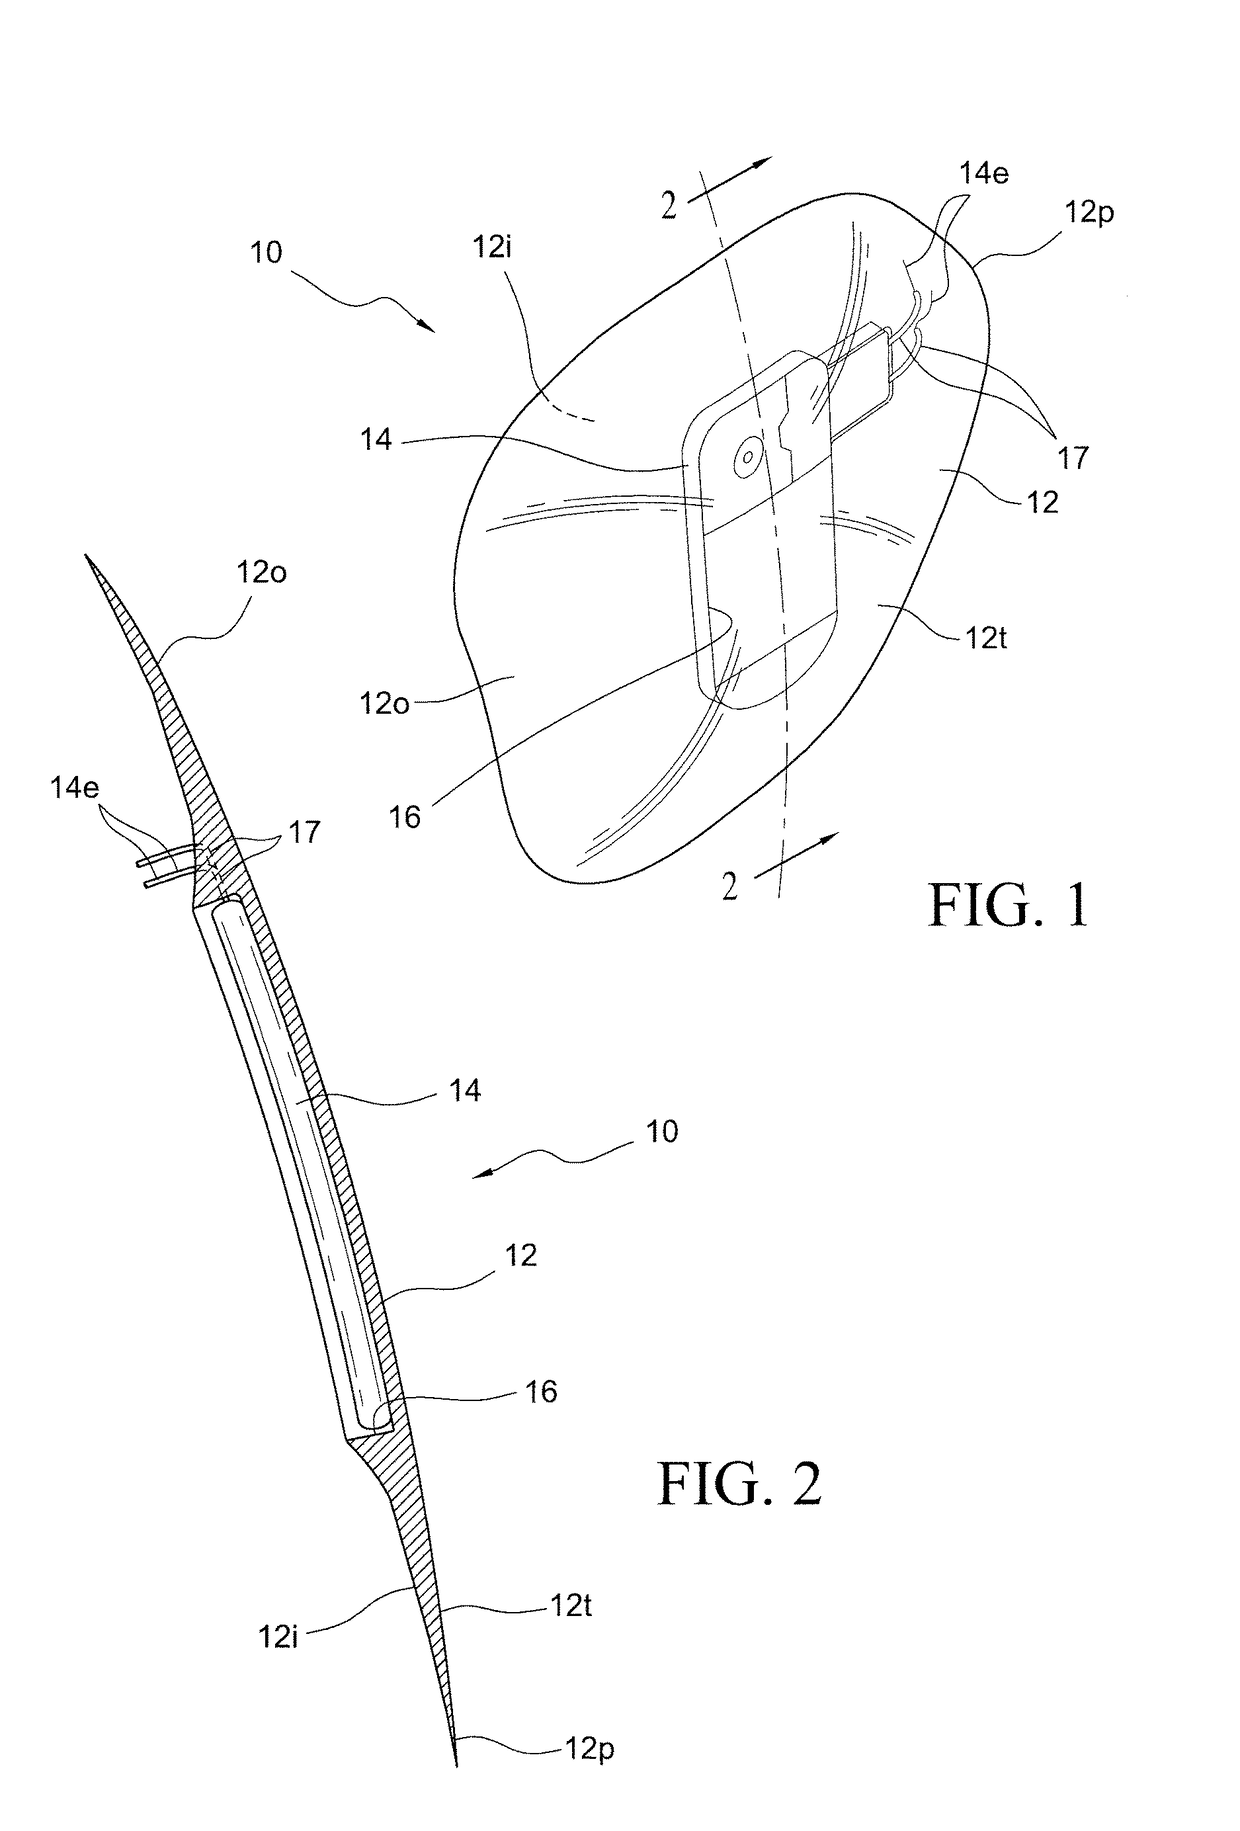 Method for manufacturing a low-profile intercranial device and the low-profile intercranial device manufactured thereby